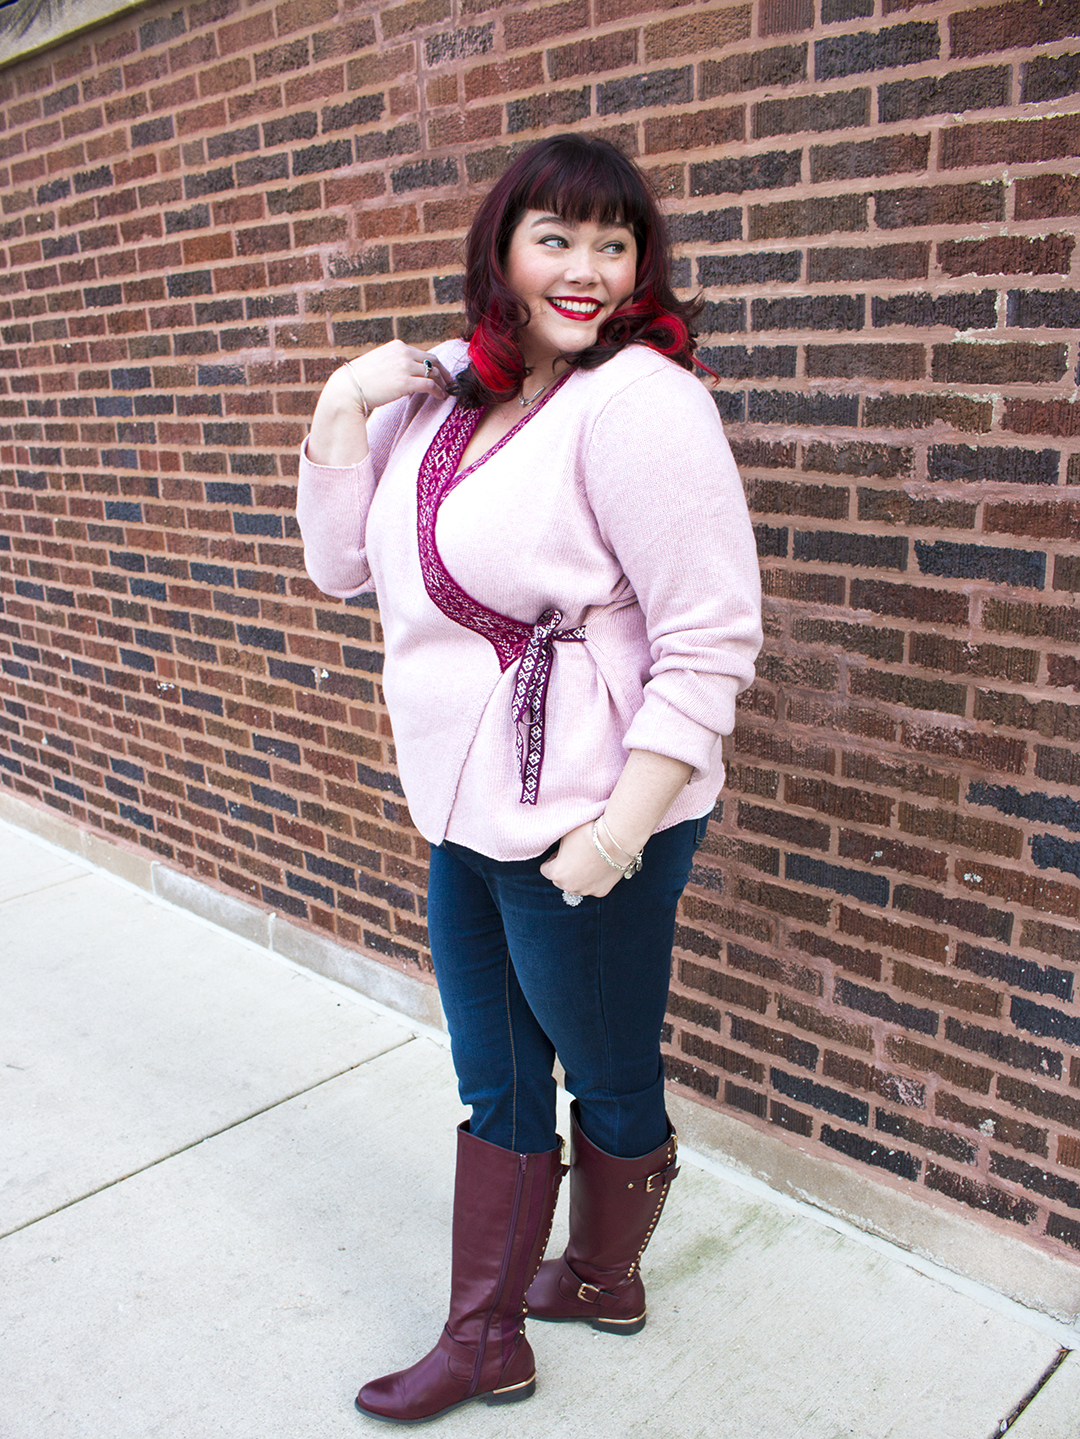 Plus Size Model in a Pink Sweater and Jeans